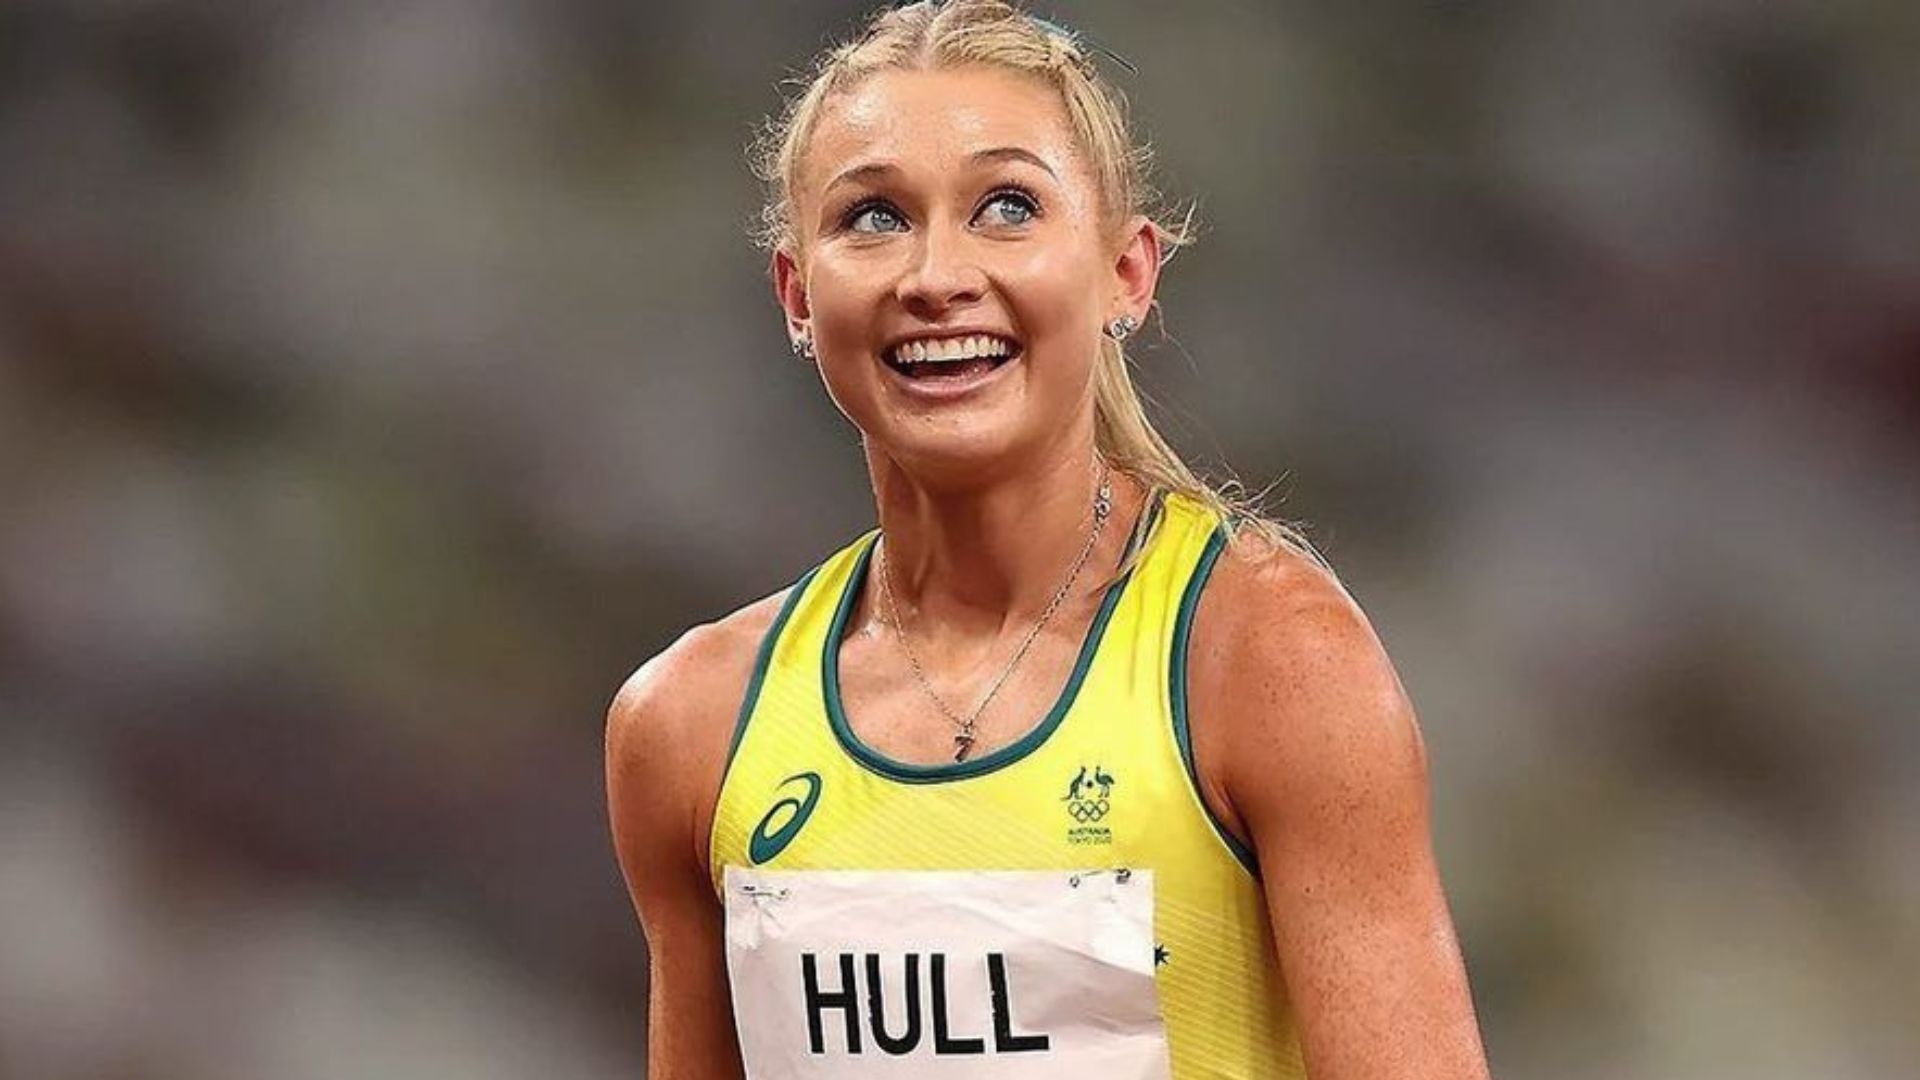 Jessica Hull at the Tokyo Olympics 2022 (Image Credits - Instagram/ @jessicaahull)